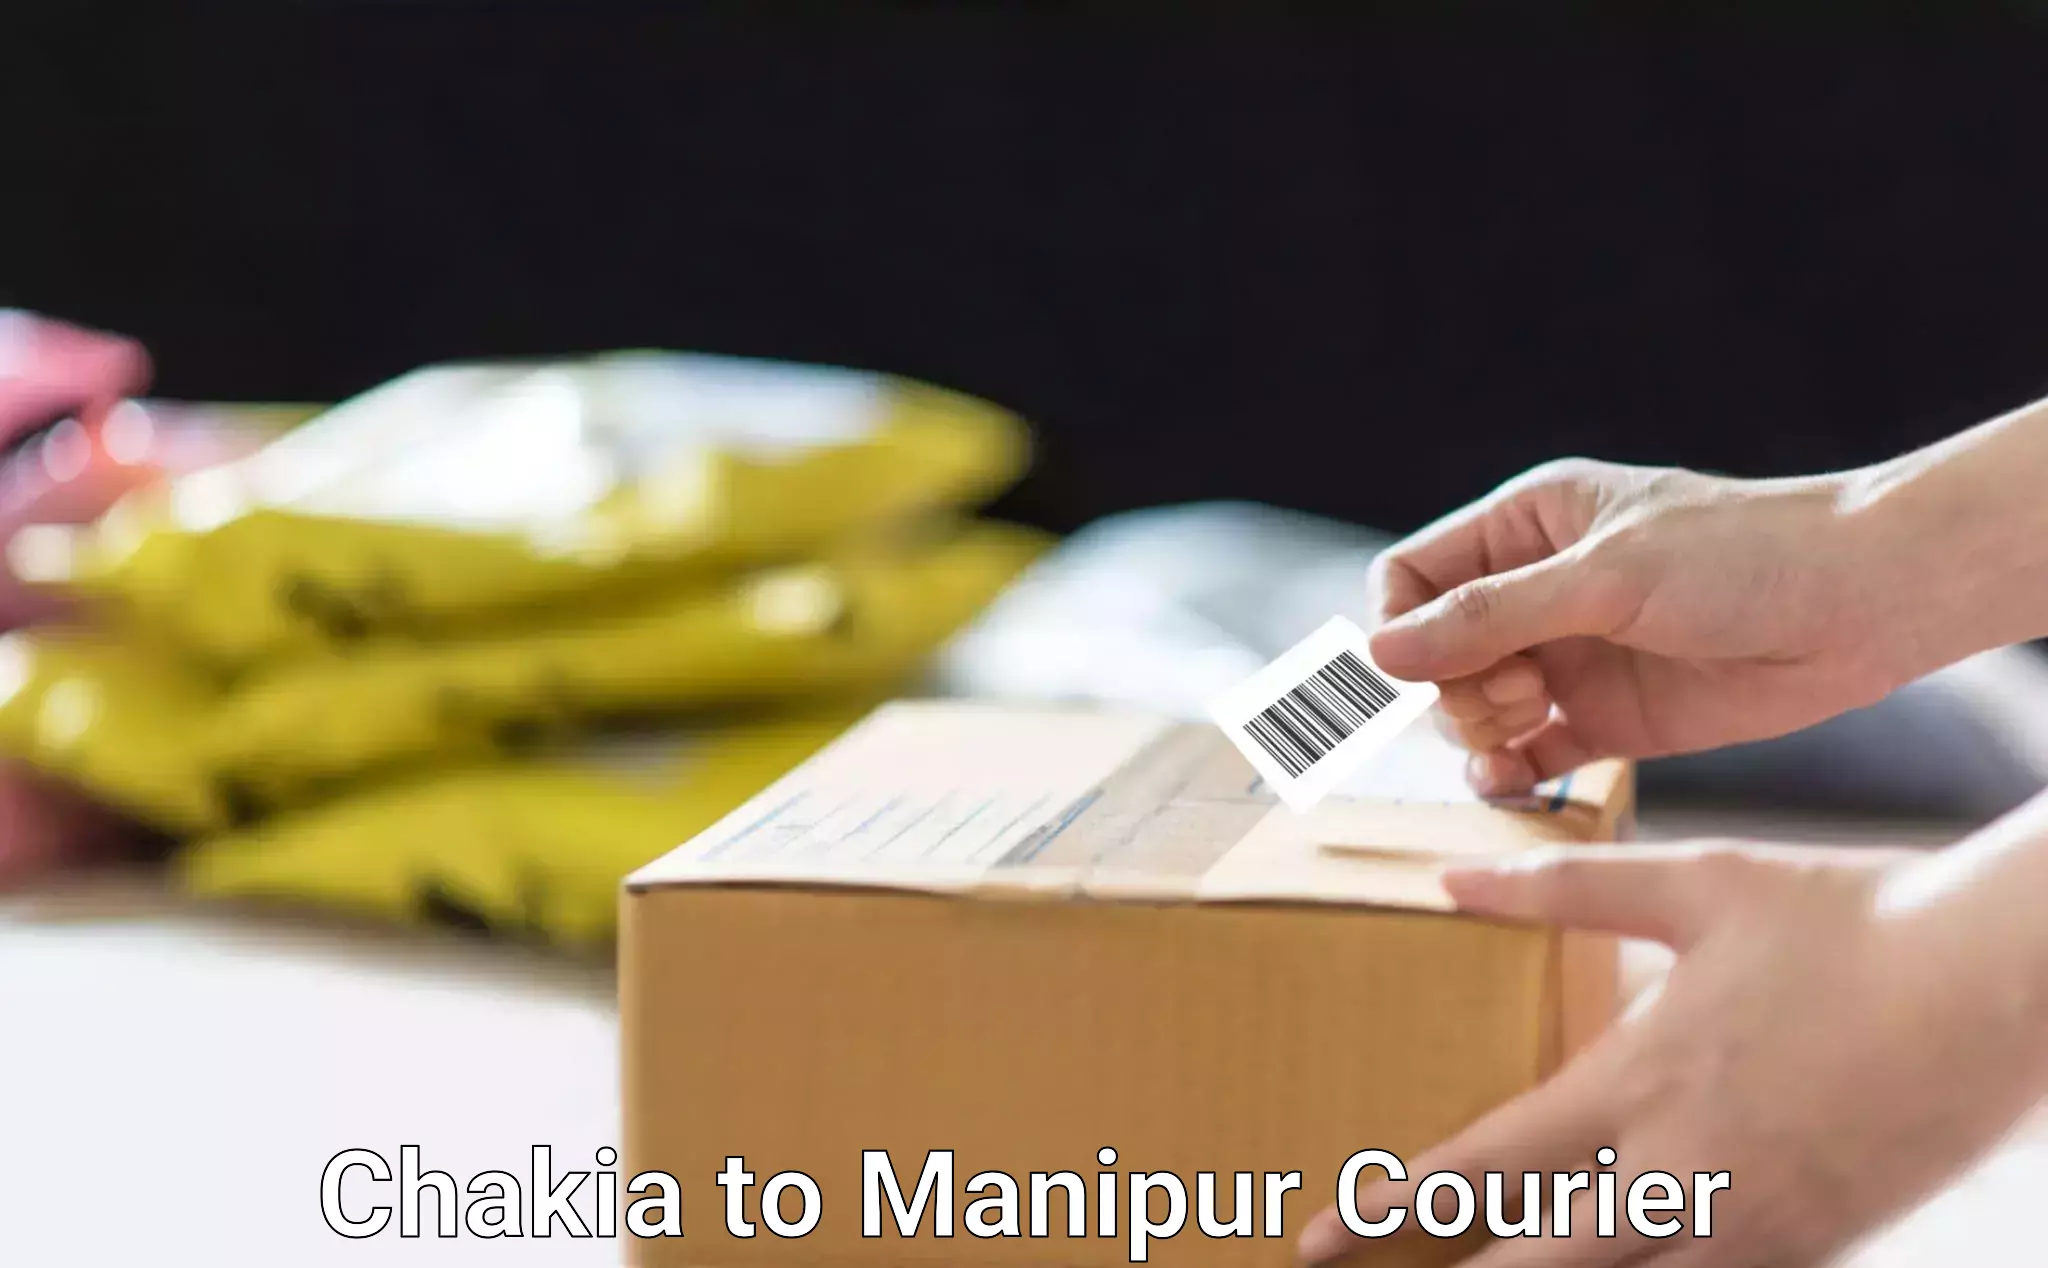 Furniture transport experts Chakia to Manipur